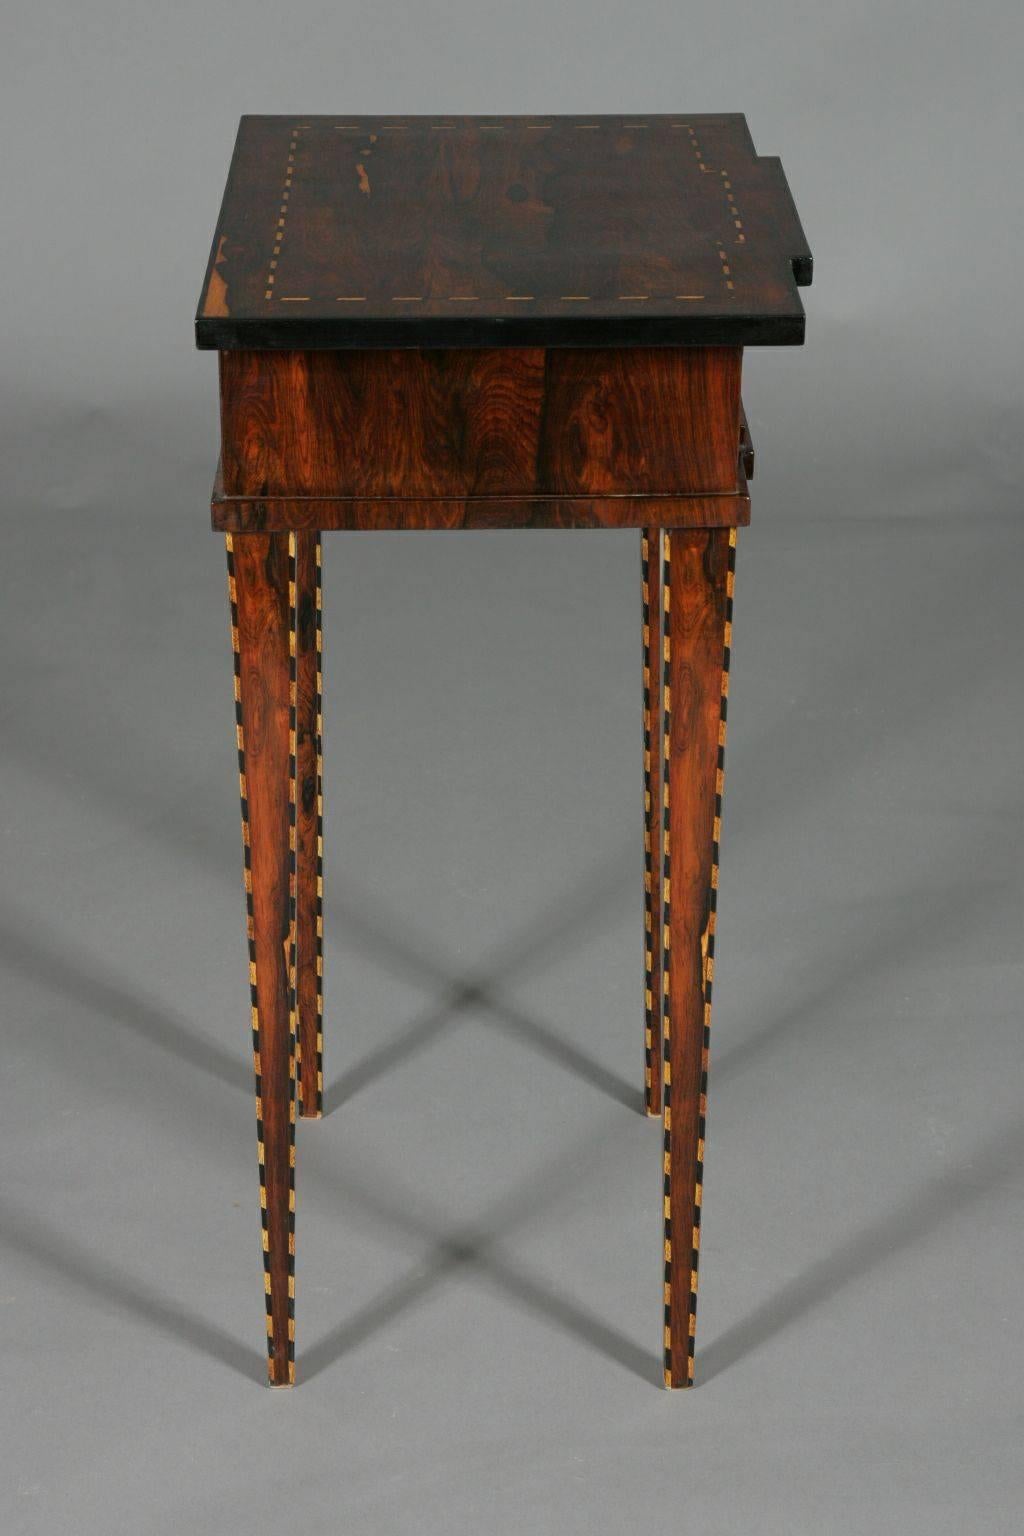 Occasional table in Classicist style.
Palisander on pinewood, framed fields of marquetry from band Intarsia. 

(G-Sam-20).
 